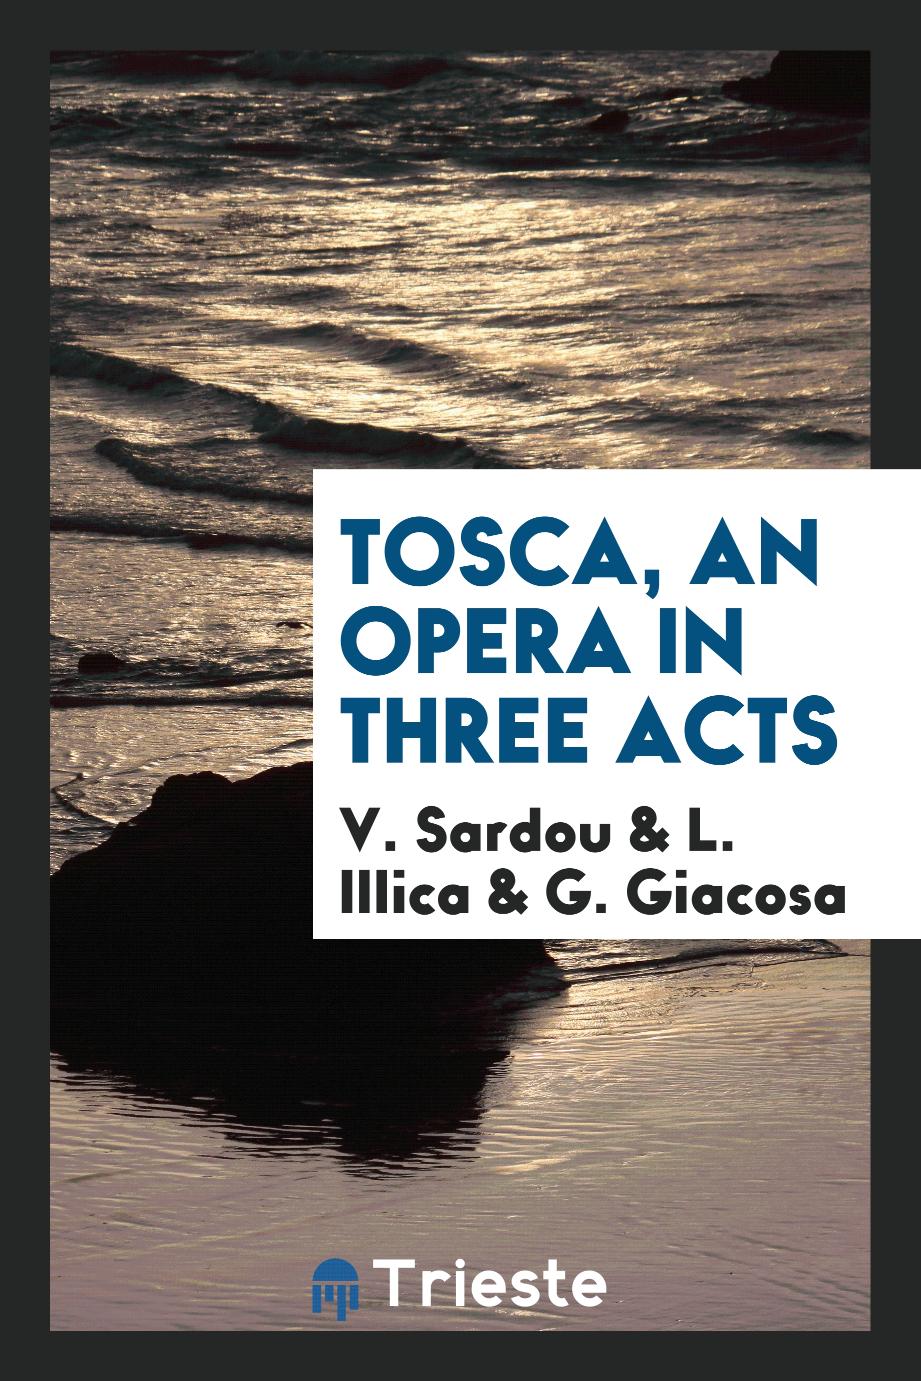 Tosca, an Opera in Three Acts